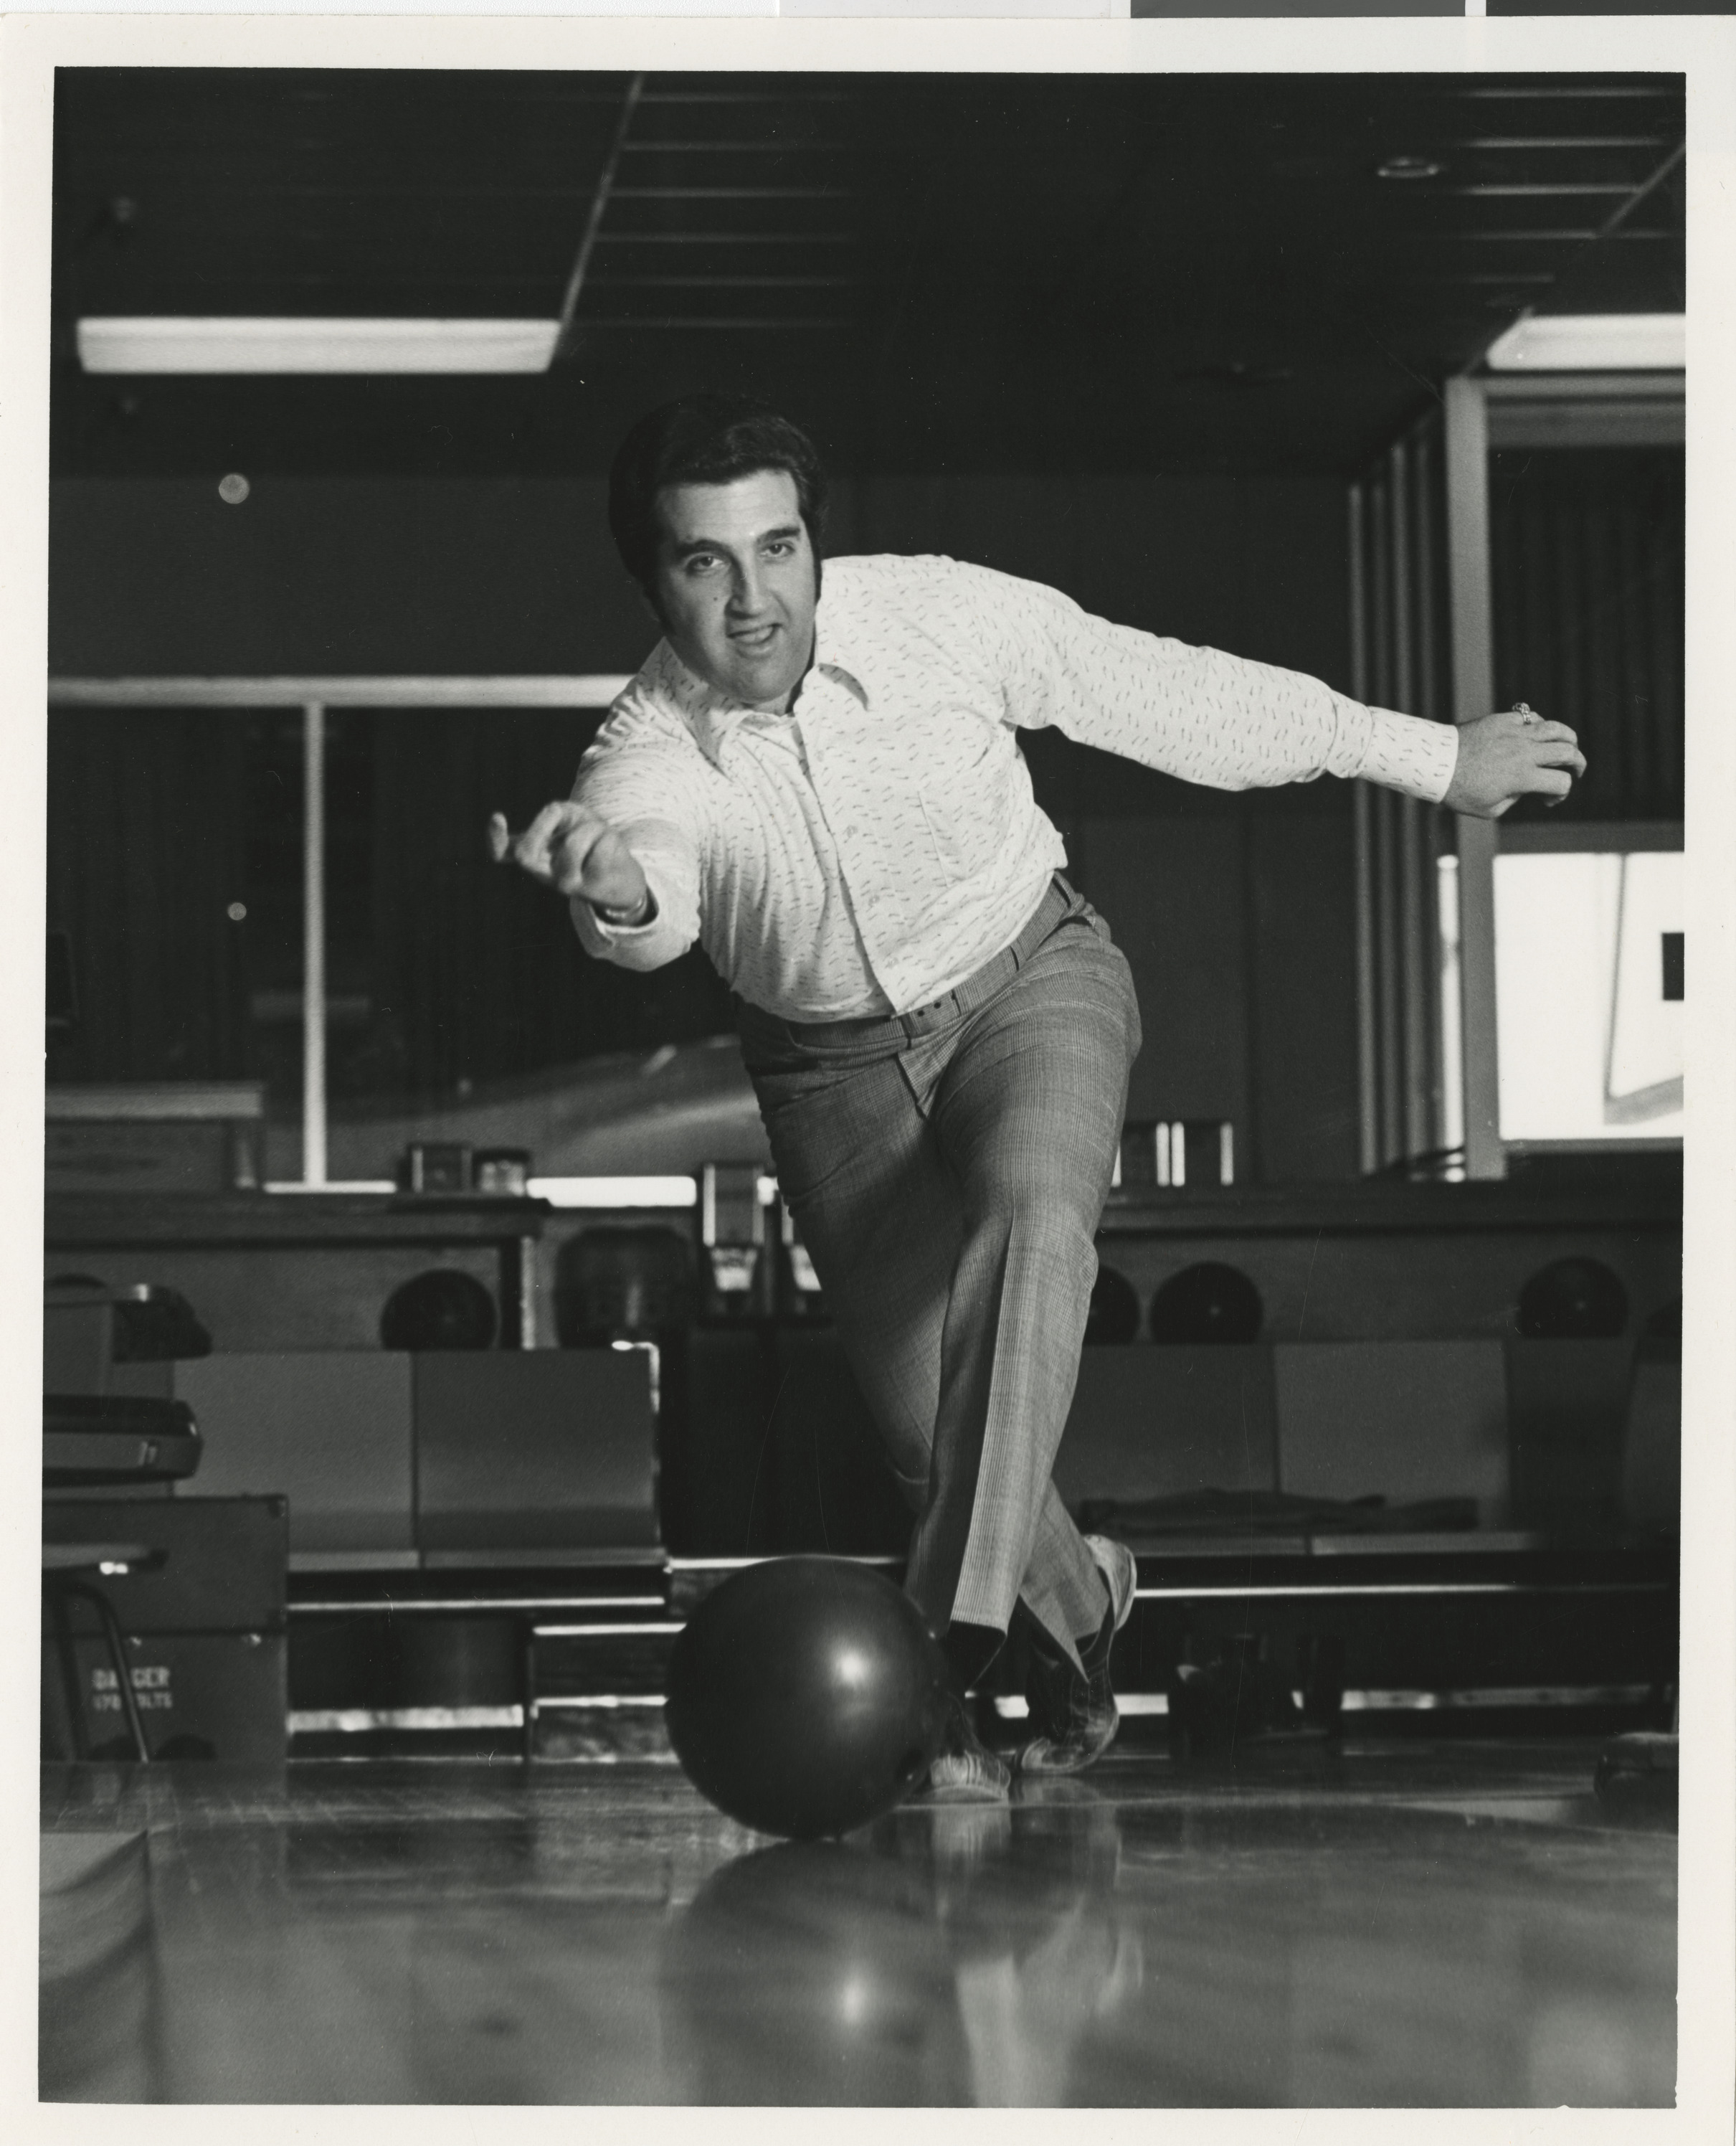 Photograph of Ron Lurie bowling